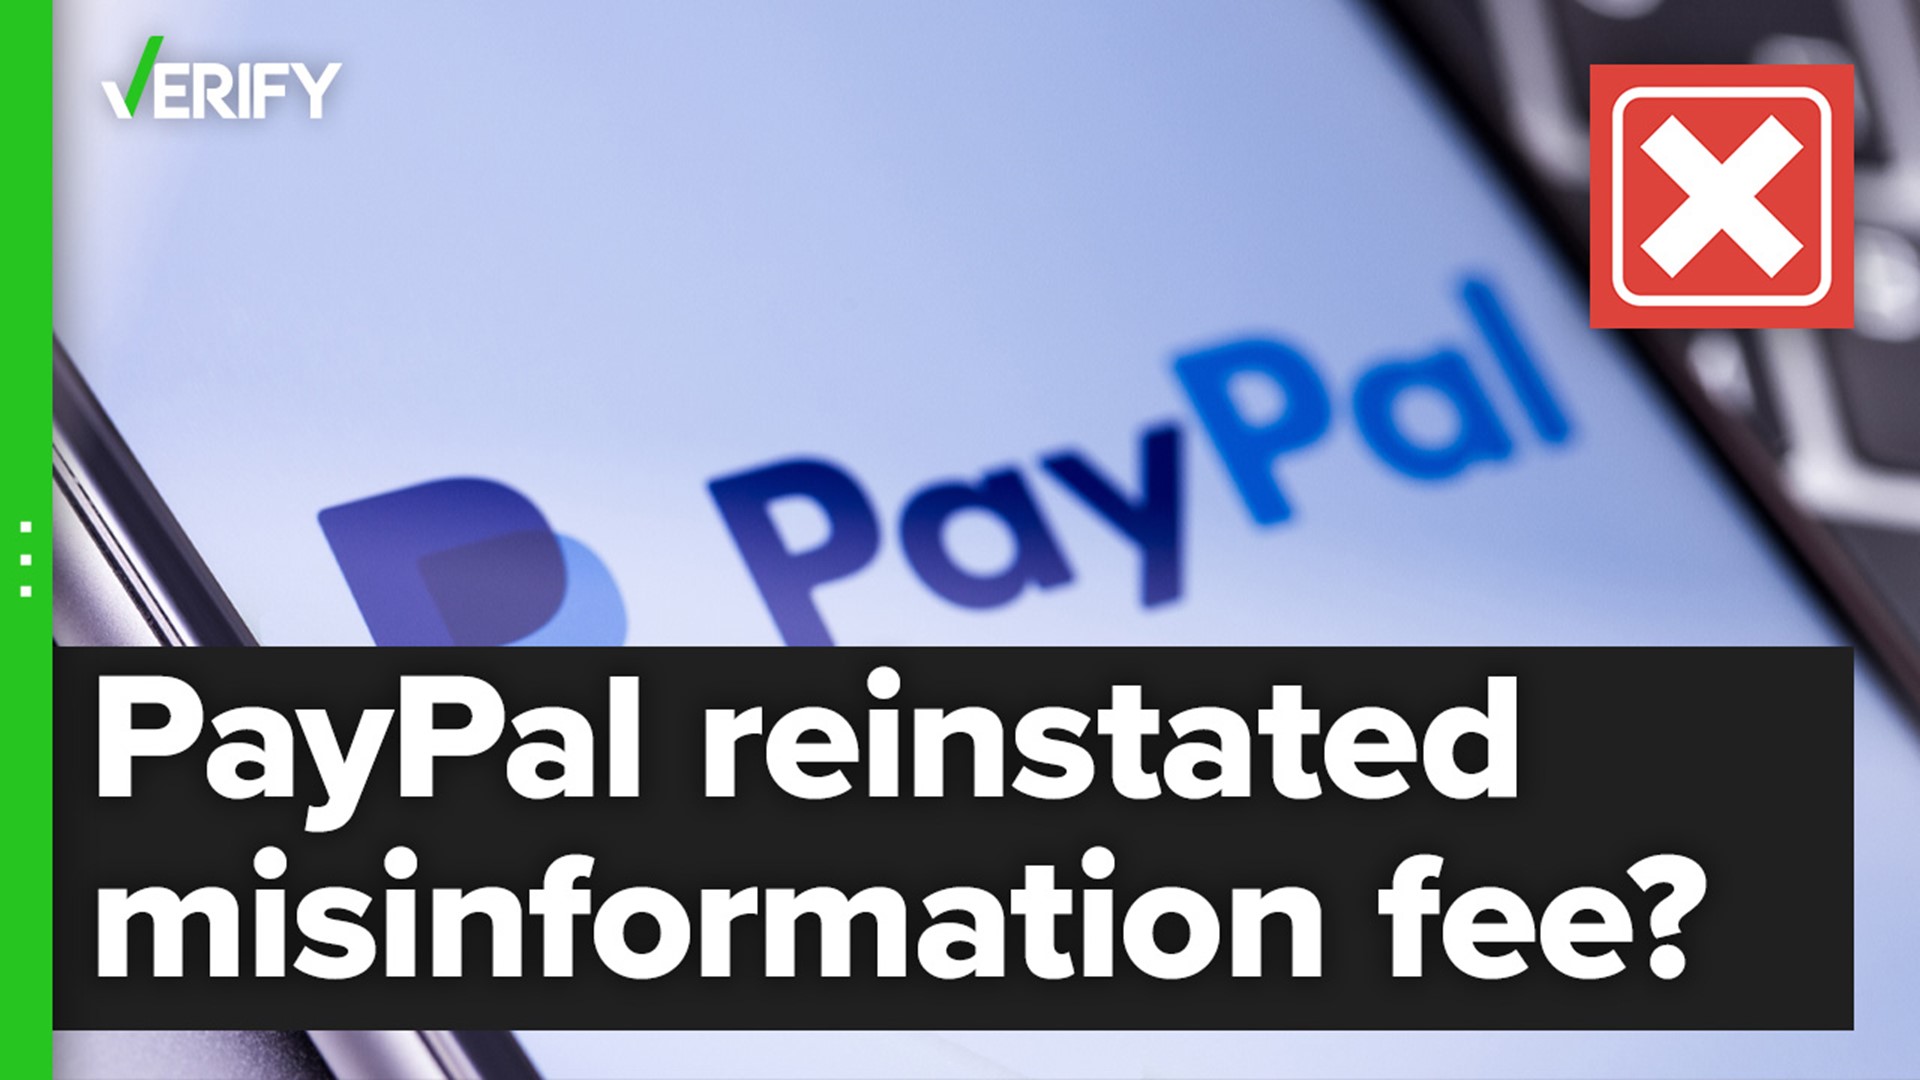 A portion of PayPal's user agreement that prohibits misleading information and reserves the right to assess damages for violations has been there since 2015.